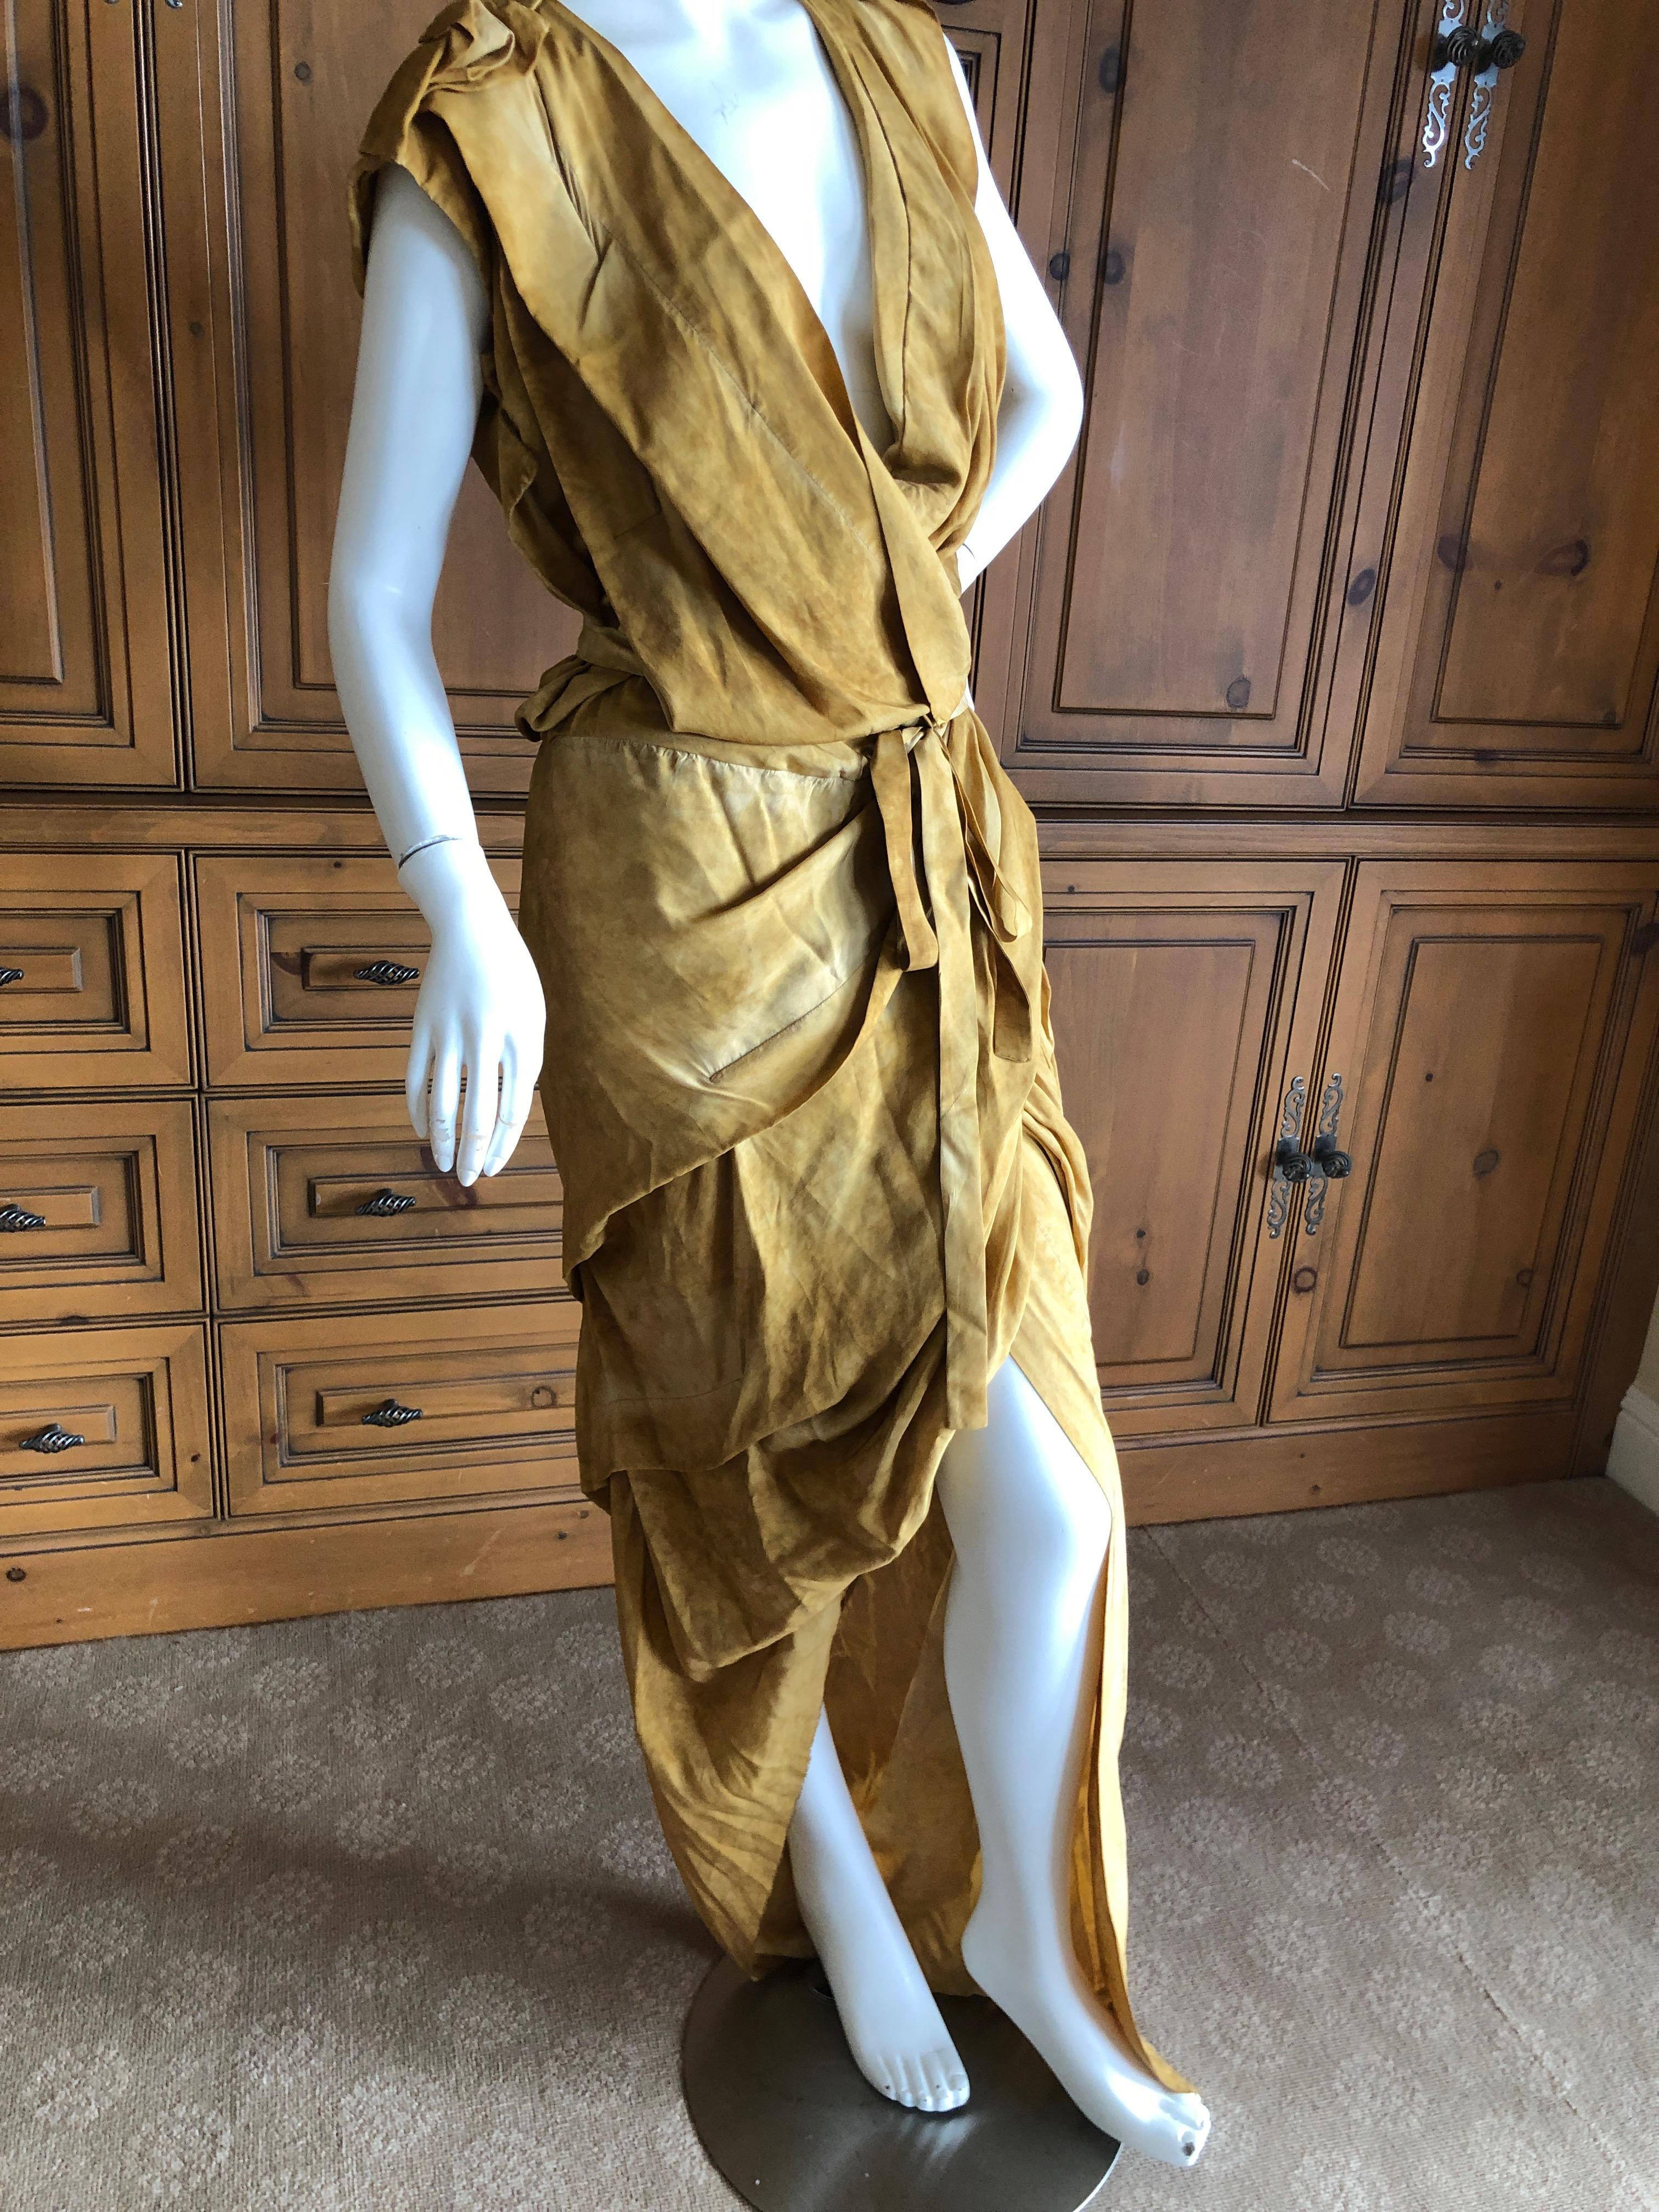 Vivienne Westwood 2012 Gold Label Draped Goddess Dress New with Tags 2